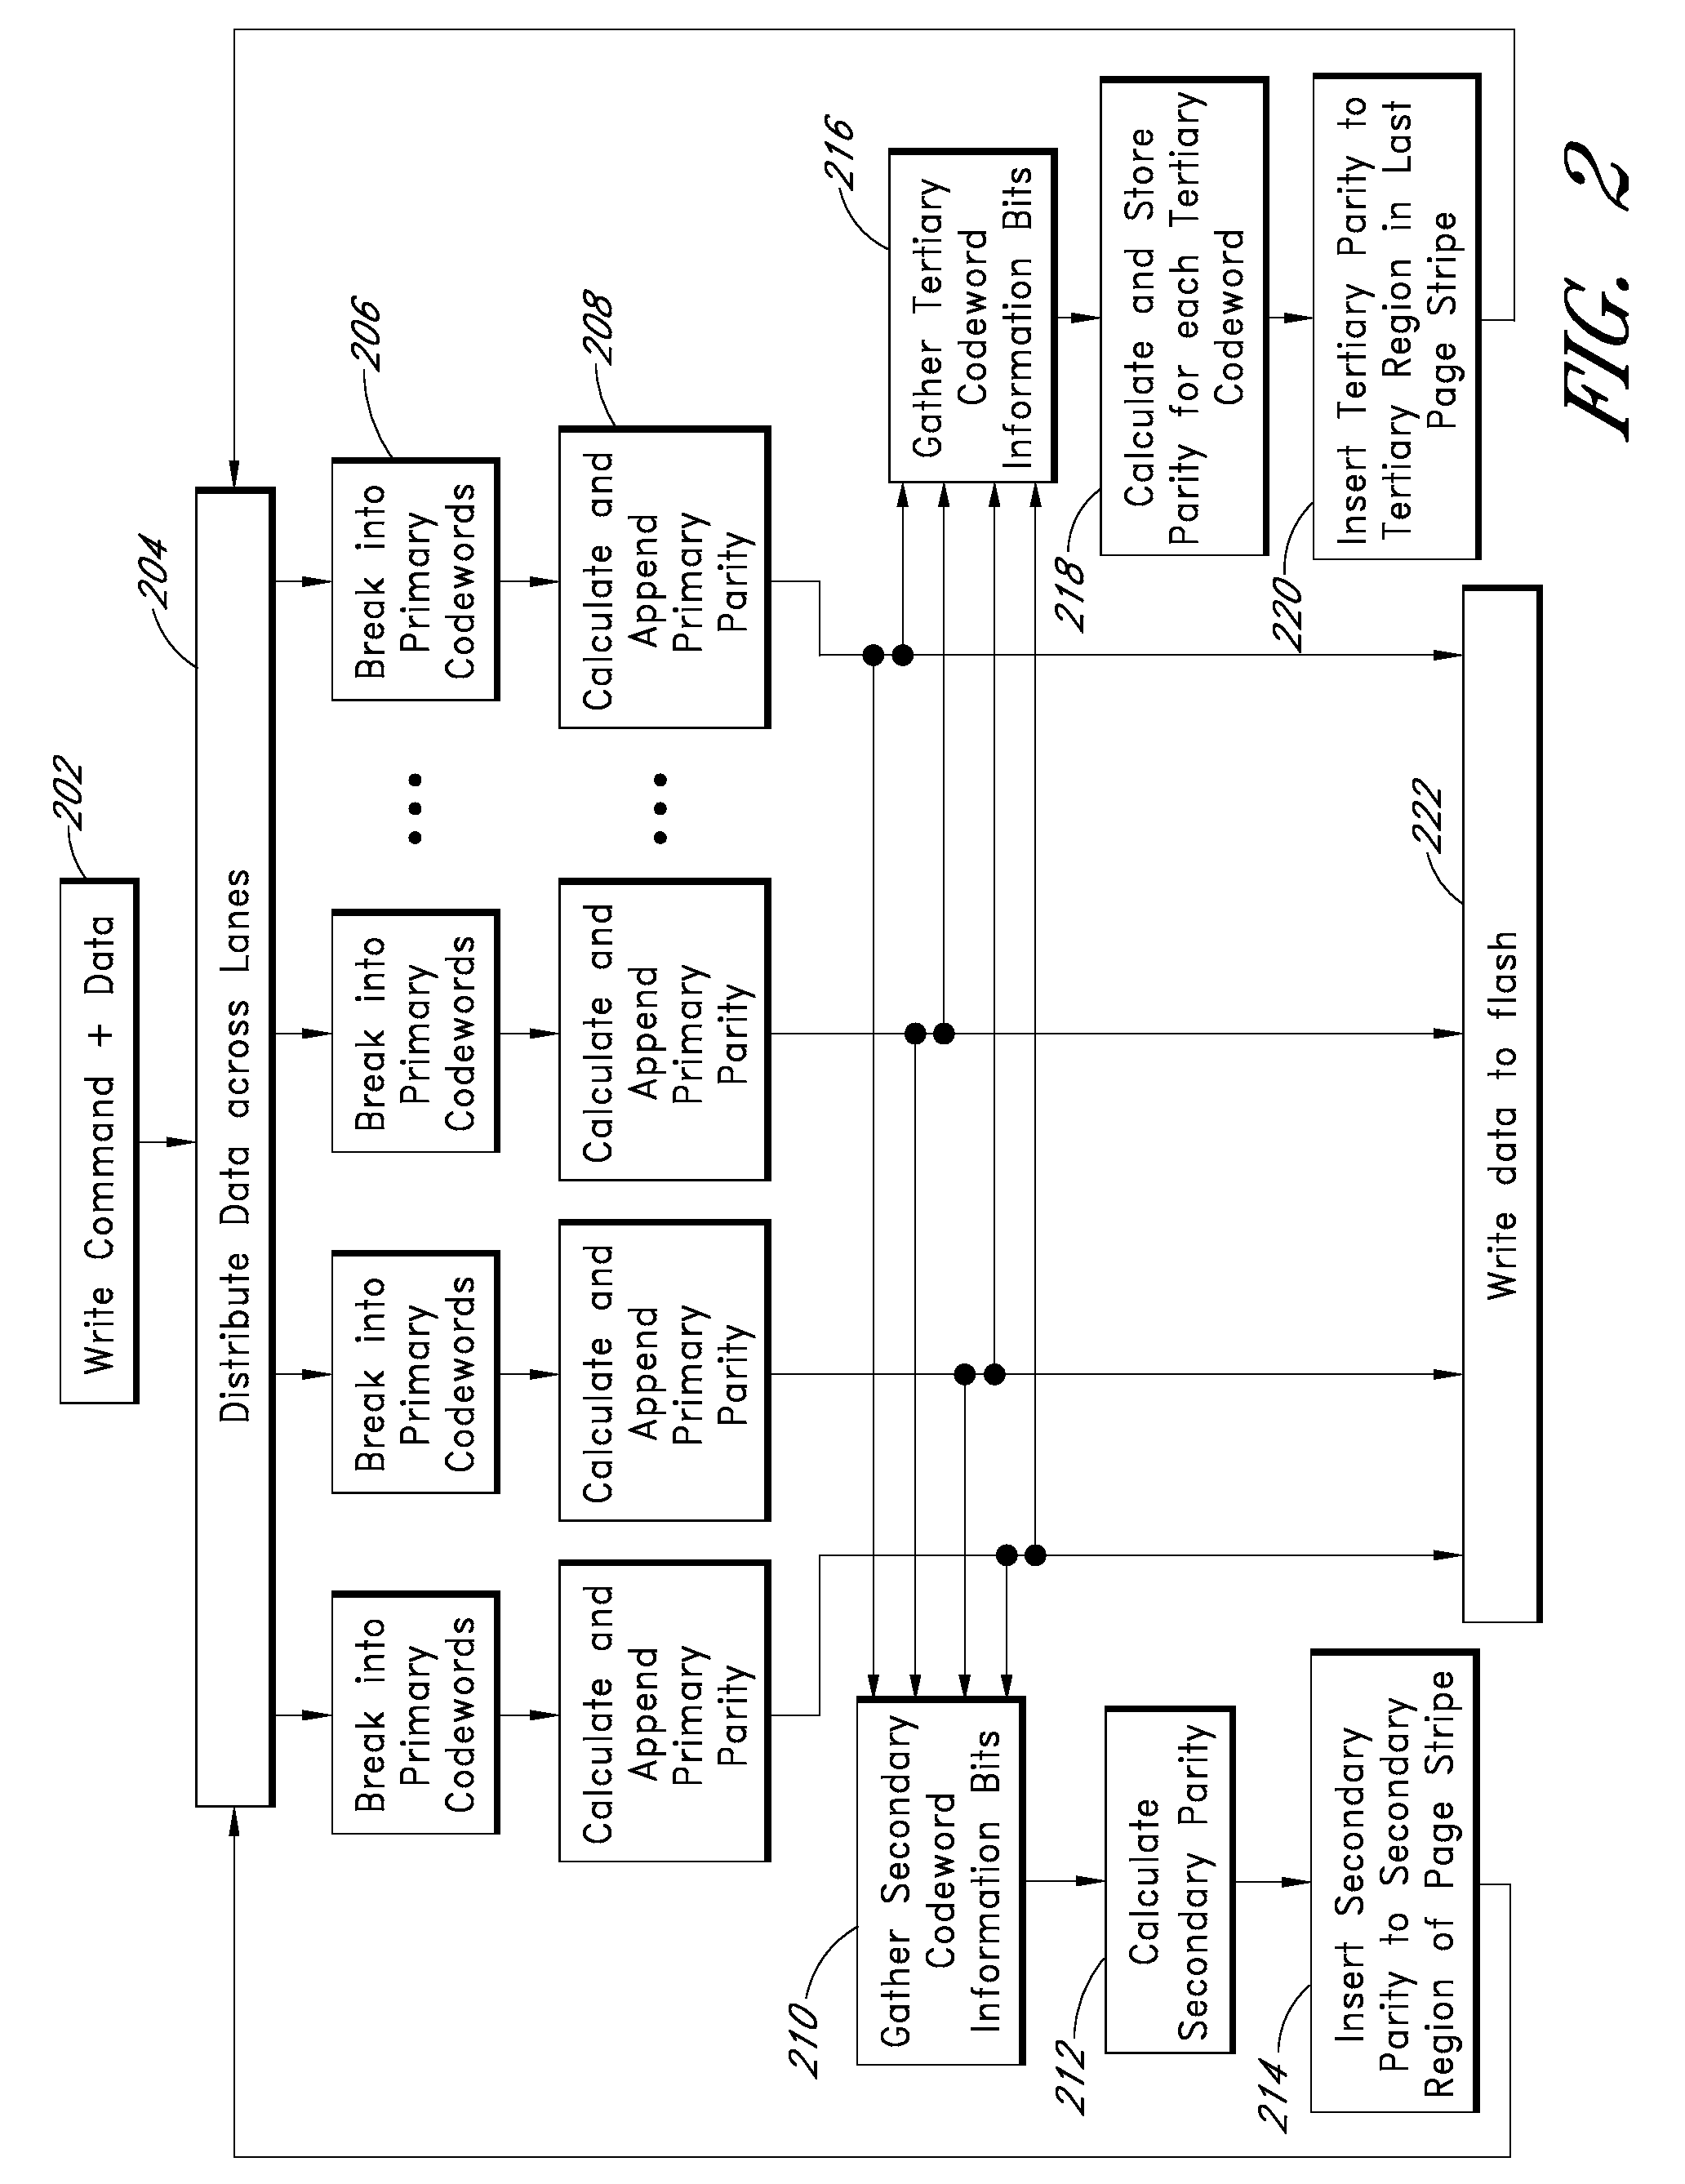 Systems and methods for low latency, high reliability error correction in a flash drive